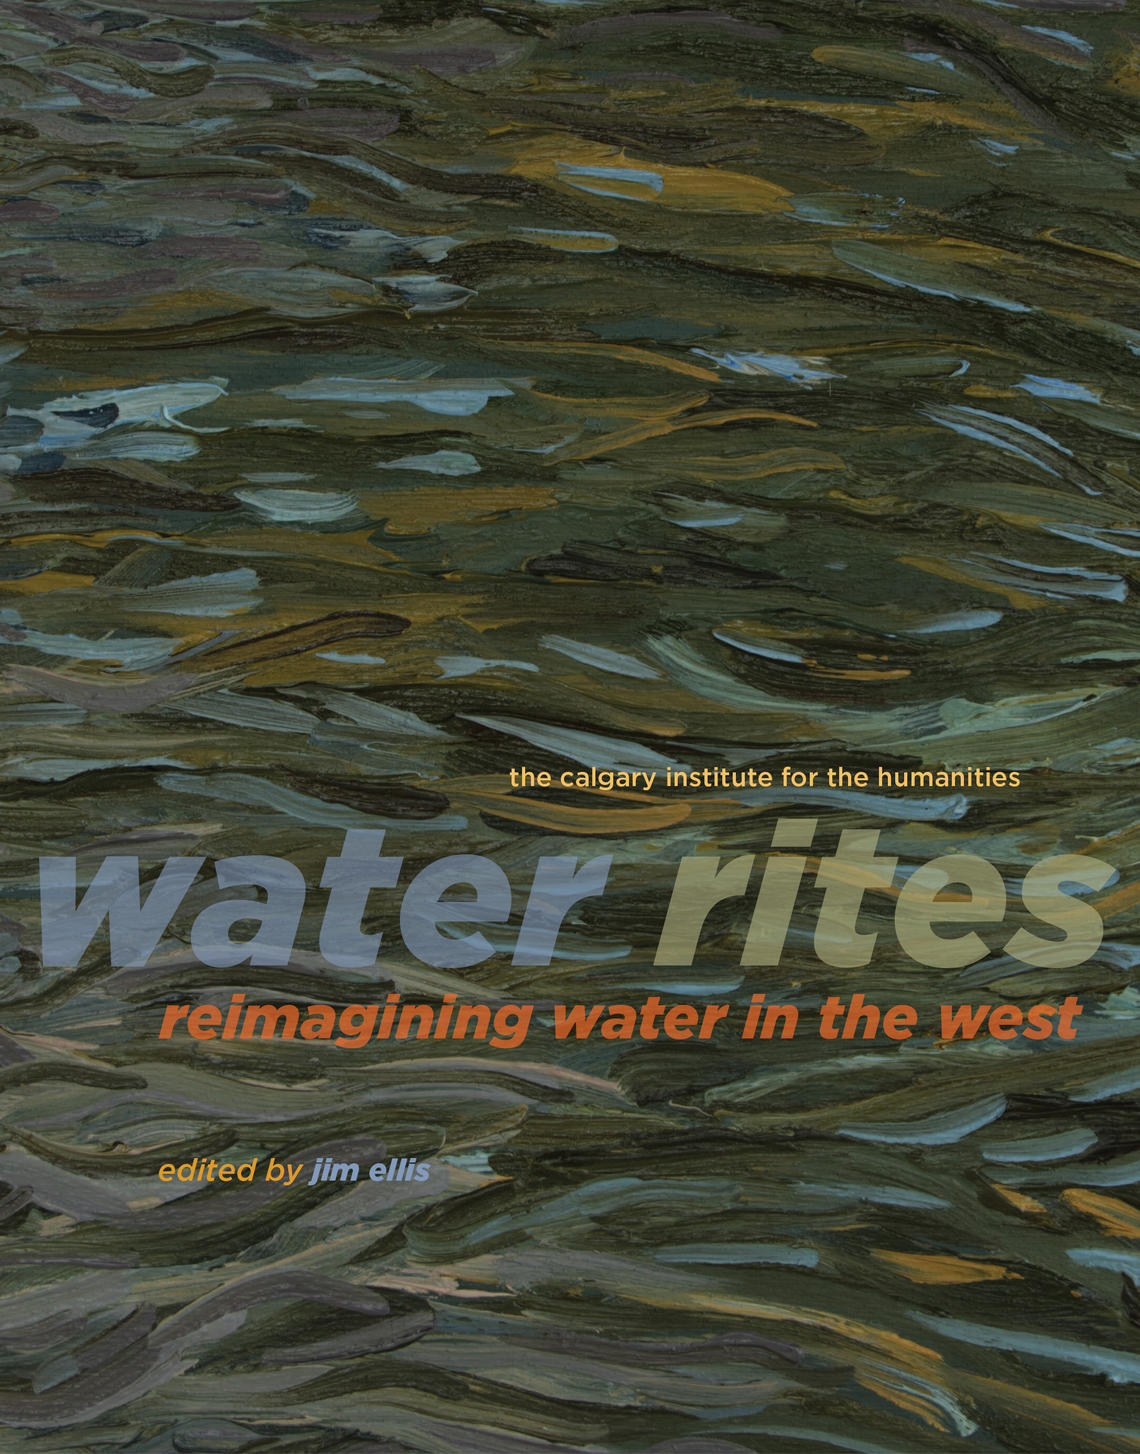 Water Rites: Reimaging Water in the West, published by the University of Calgary Press, is a collection of essays exploring the diverse issues related to water in Alberta.